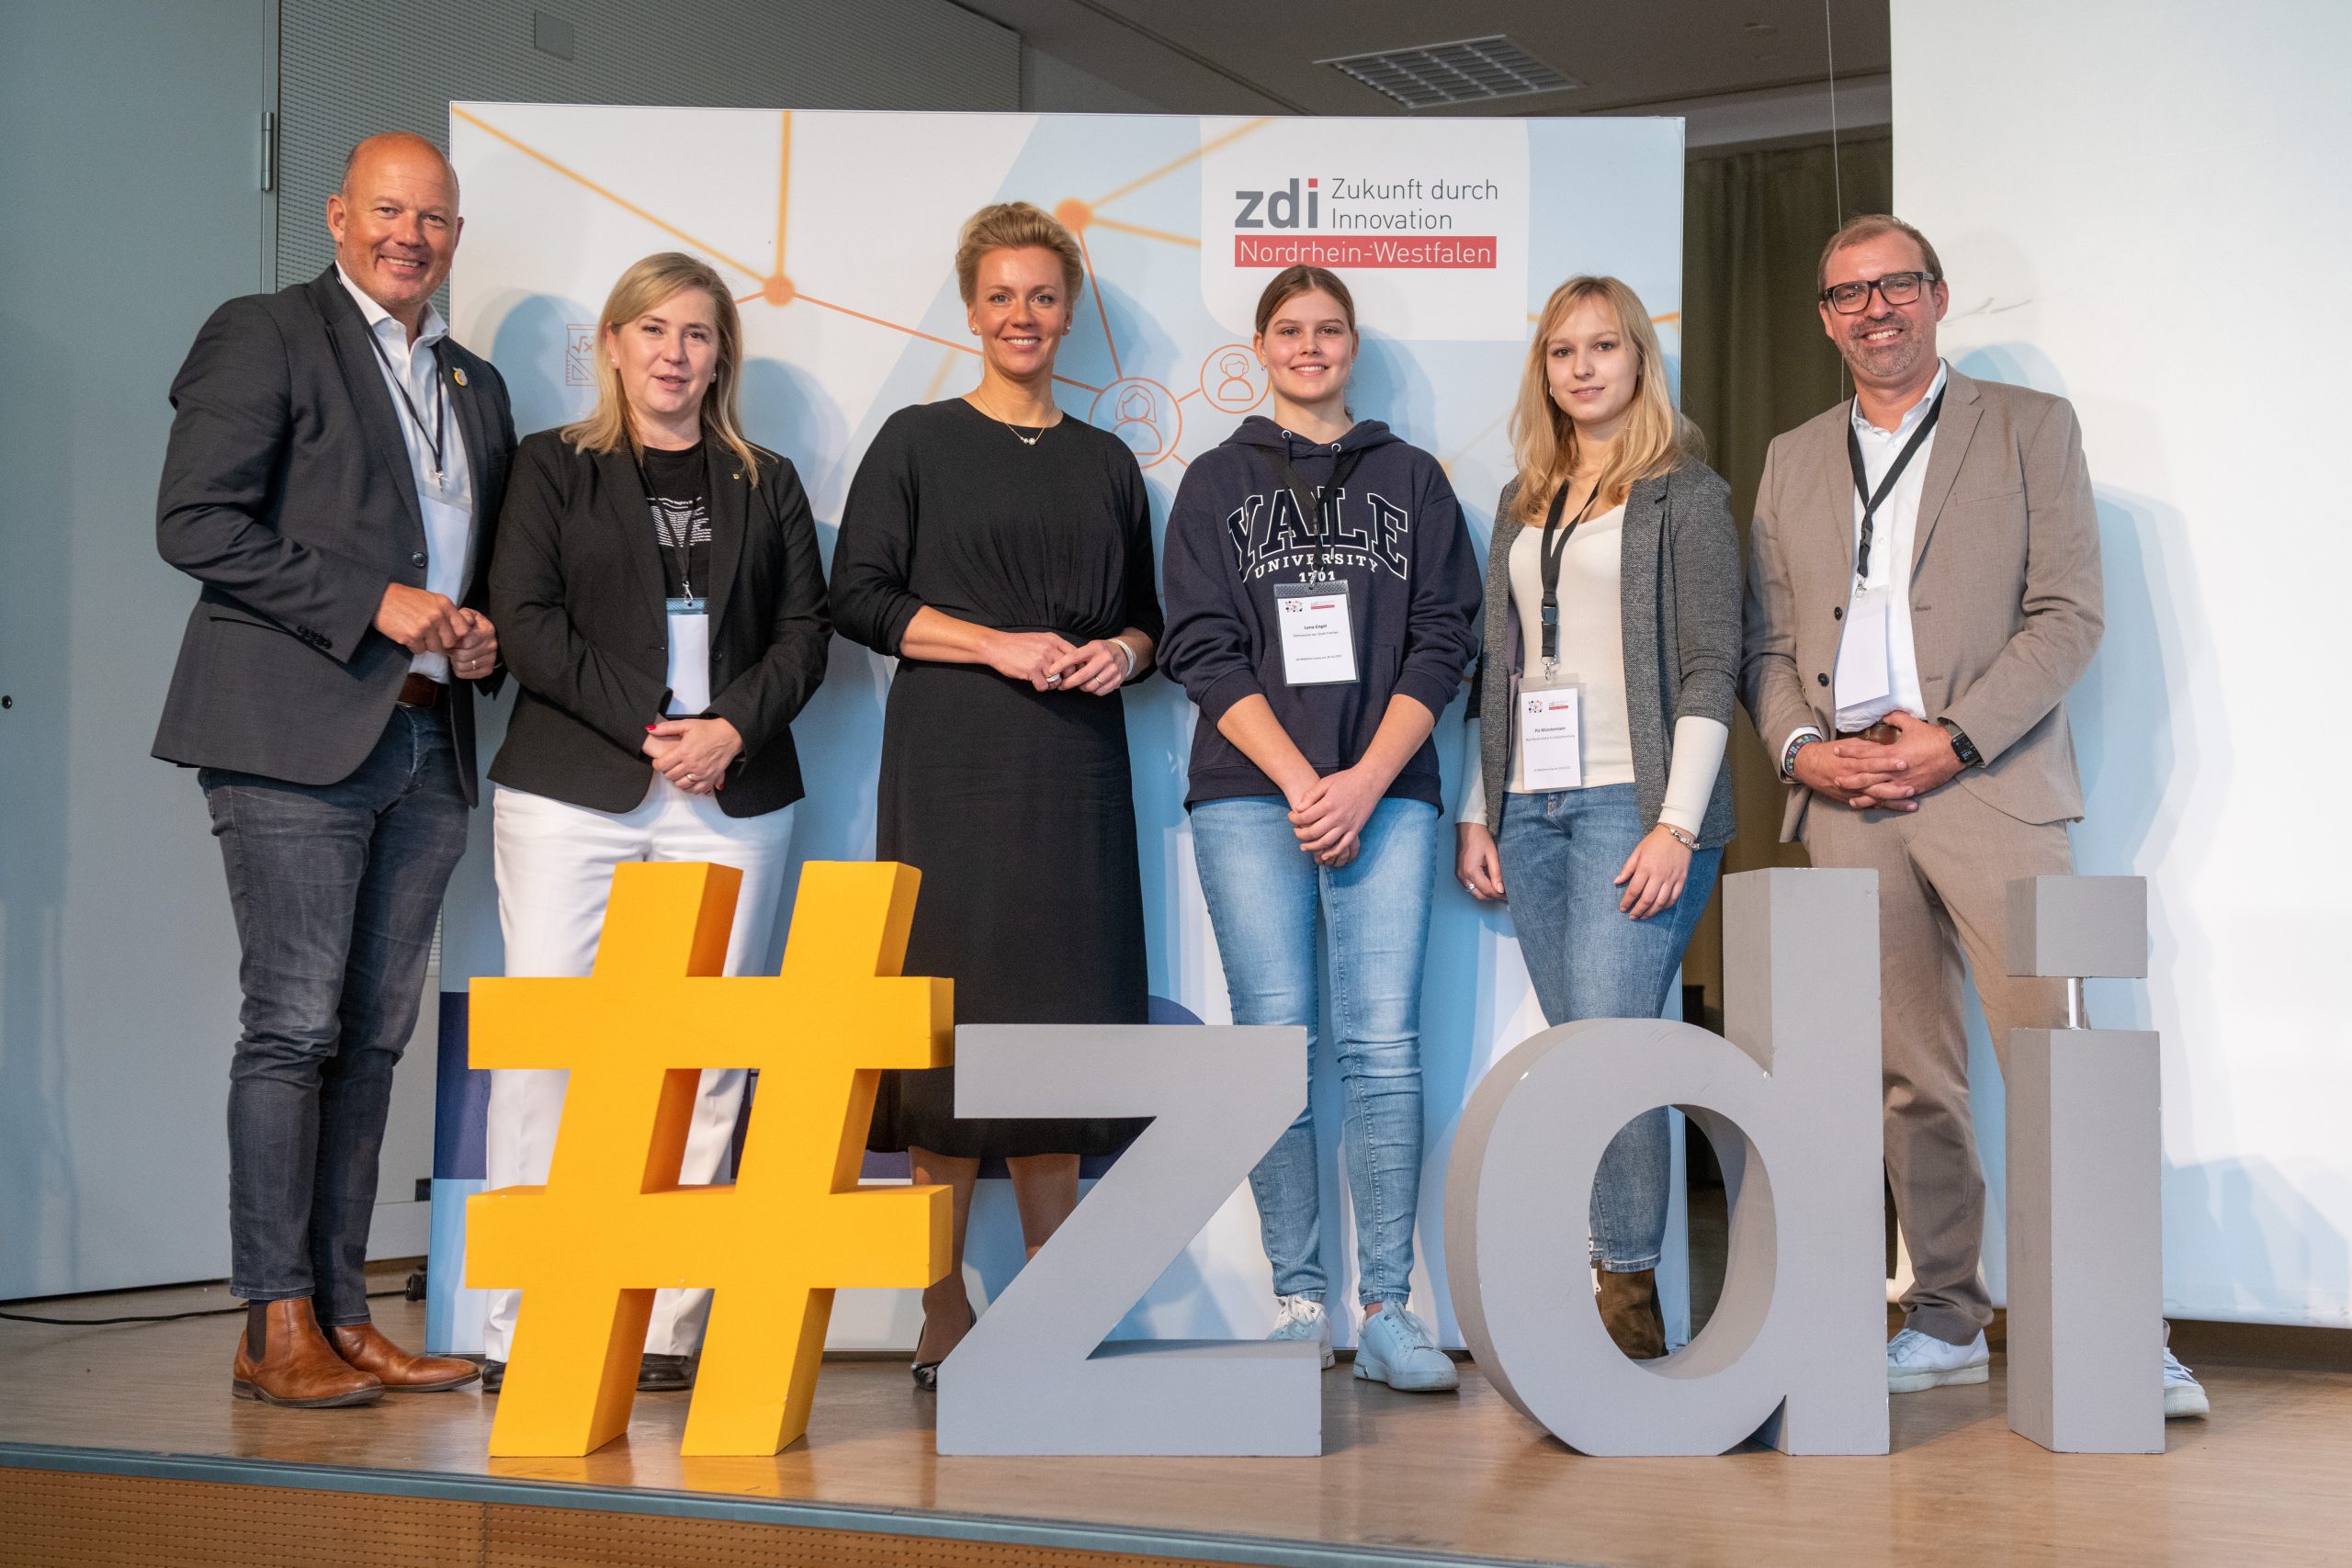 From left to right: District Administrator Frank Rock, Mayor Susanna Stupp, Minister Ina Brandes, student Lena Engel, chemical laboratory assistant Pia Münstermann and coordinator of the zdi center Mönchengladbach, Axel Tillmanns.